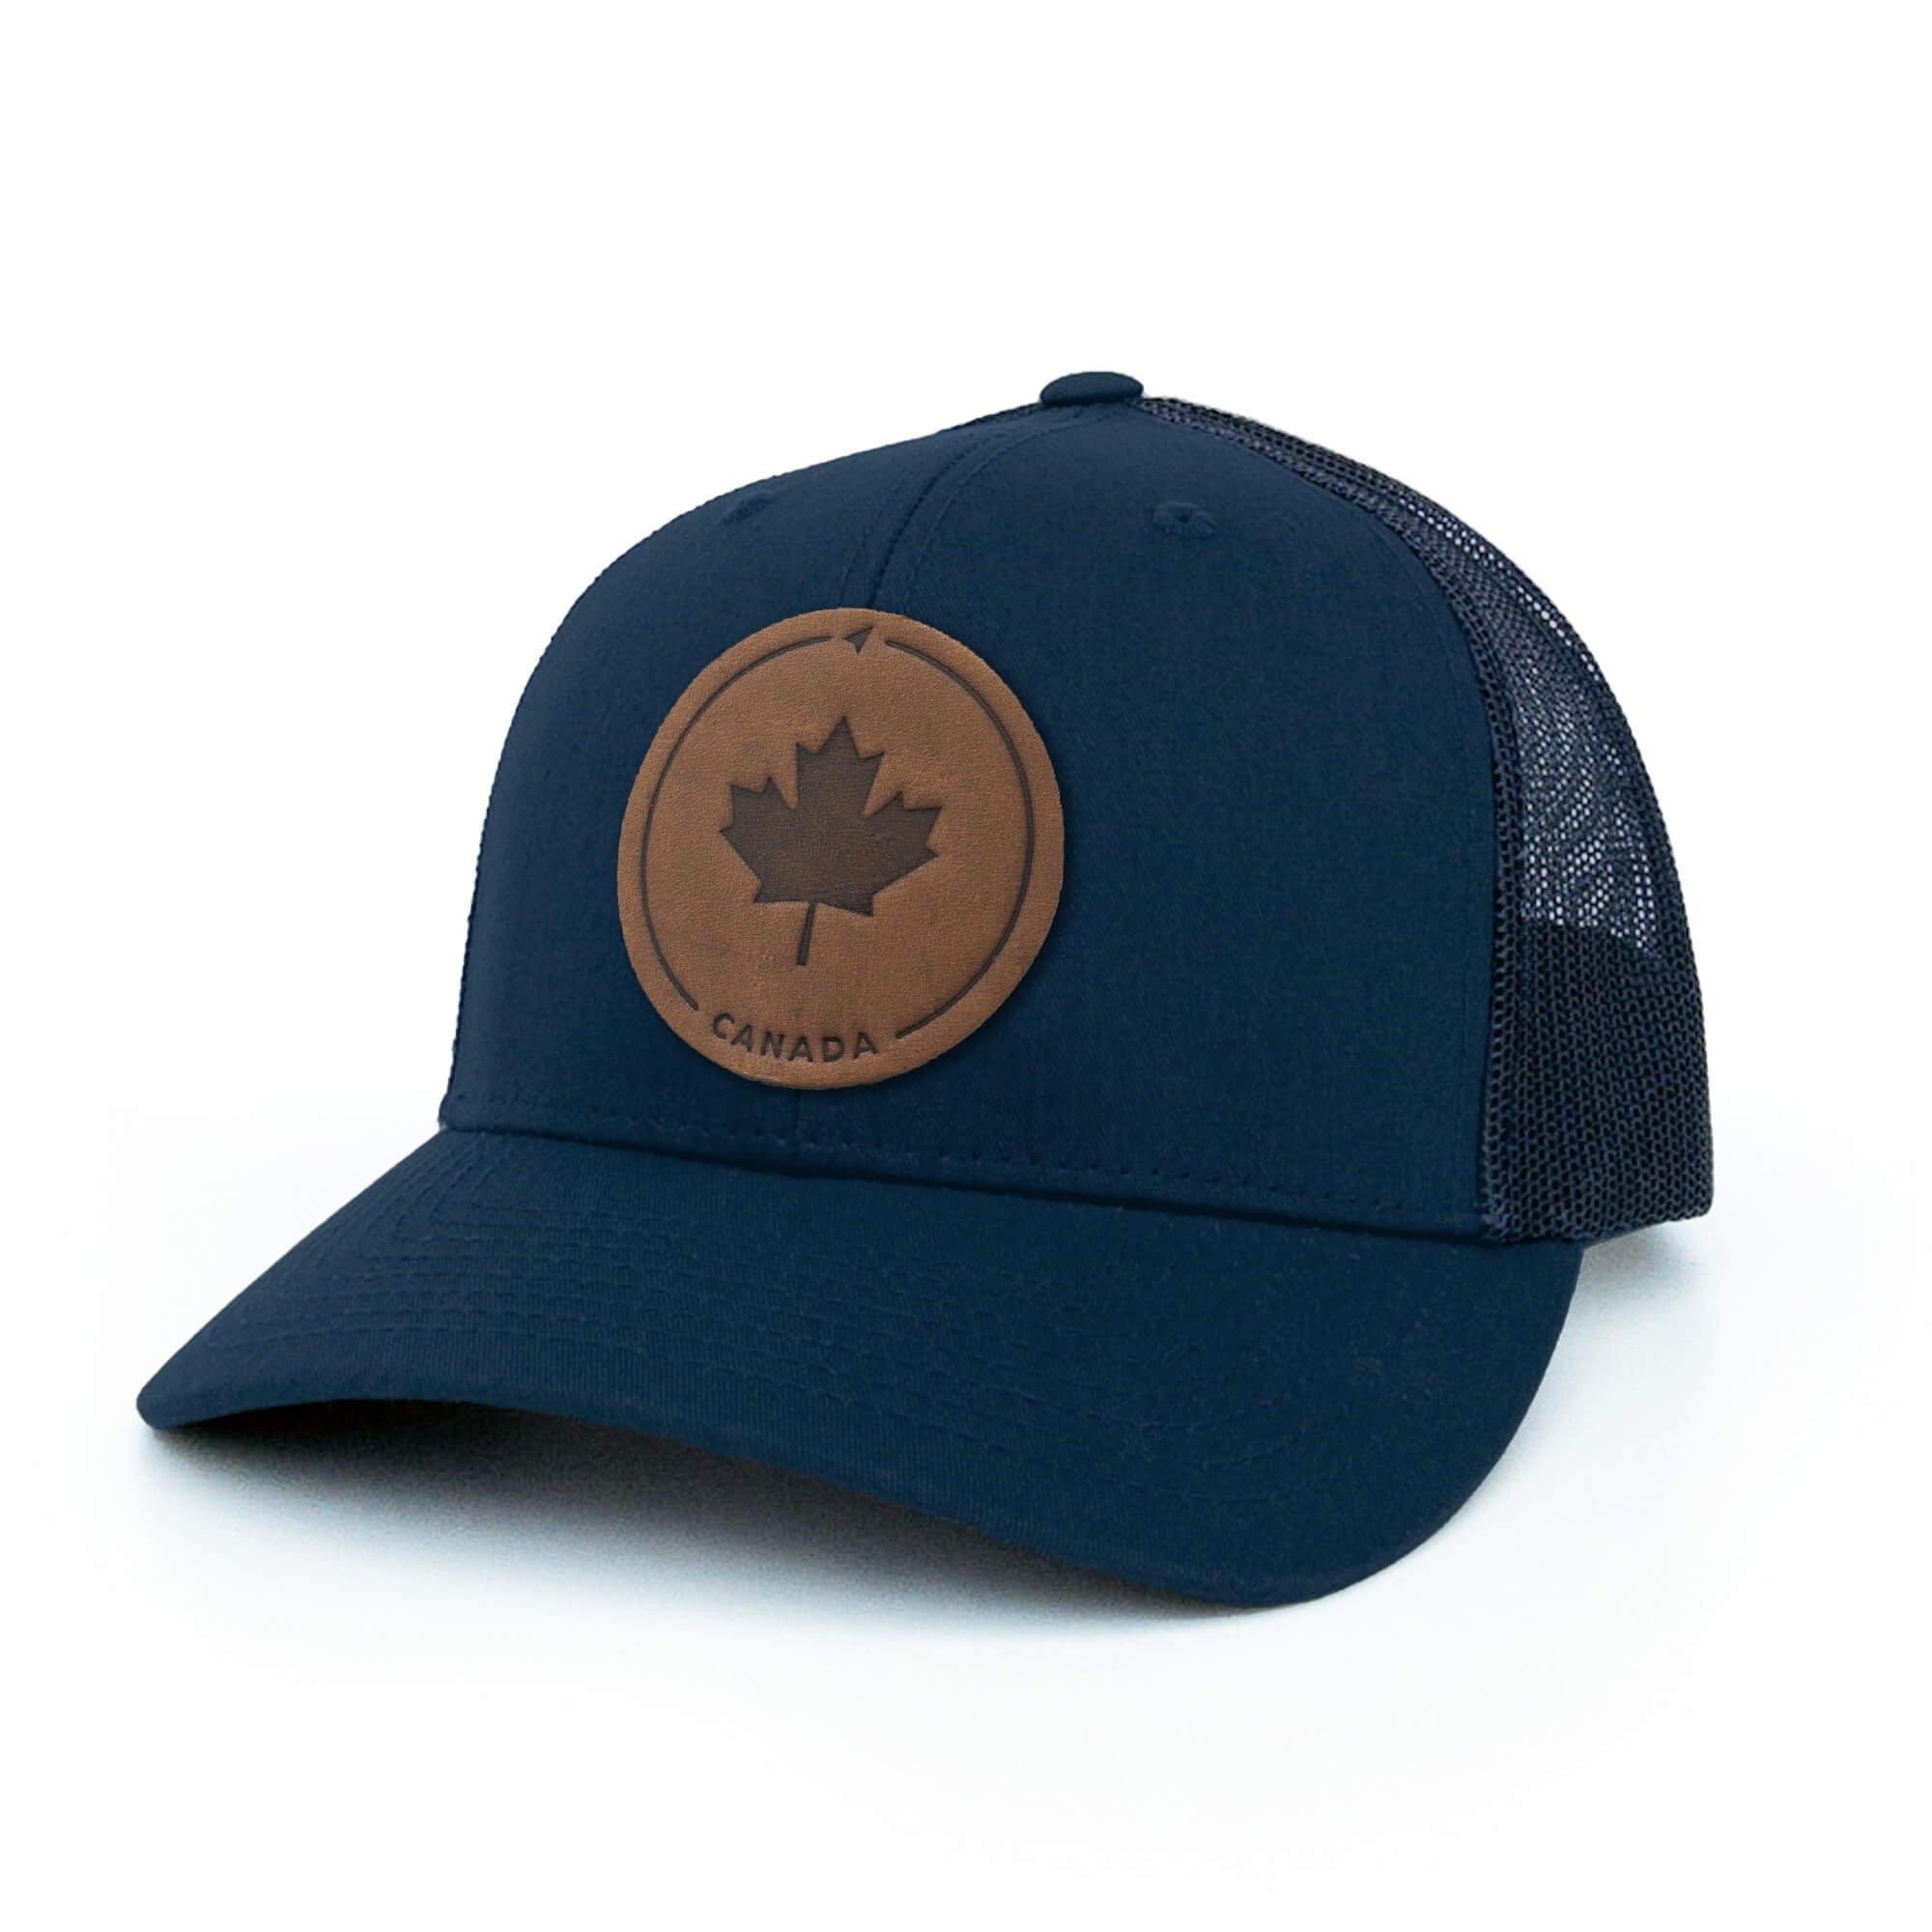 Navy trucker hat with full-grain leather patch of Maple Leaf | BLACK-002-001, CHARC-002-001, NAVY-002-001, HGREY-002-001, MOSS-002-001, BROWN-002-001, RED-002-001